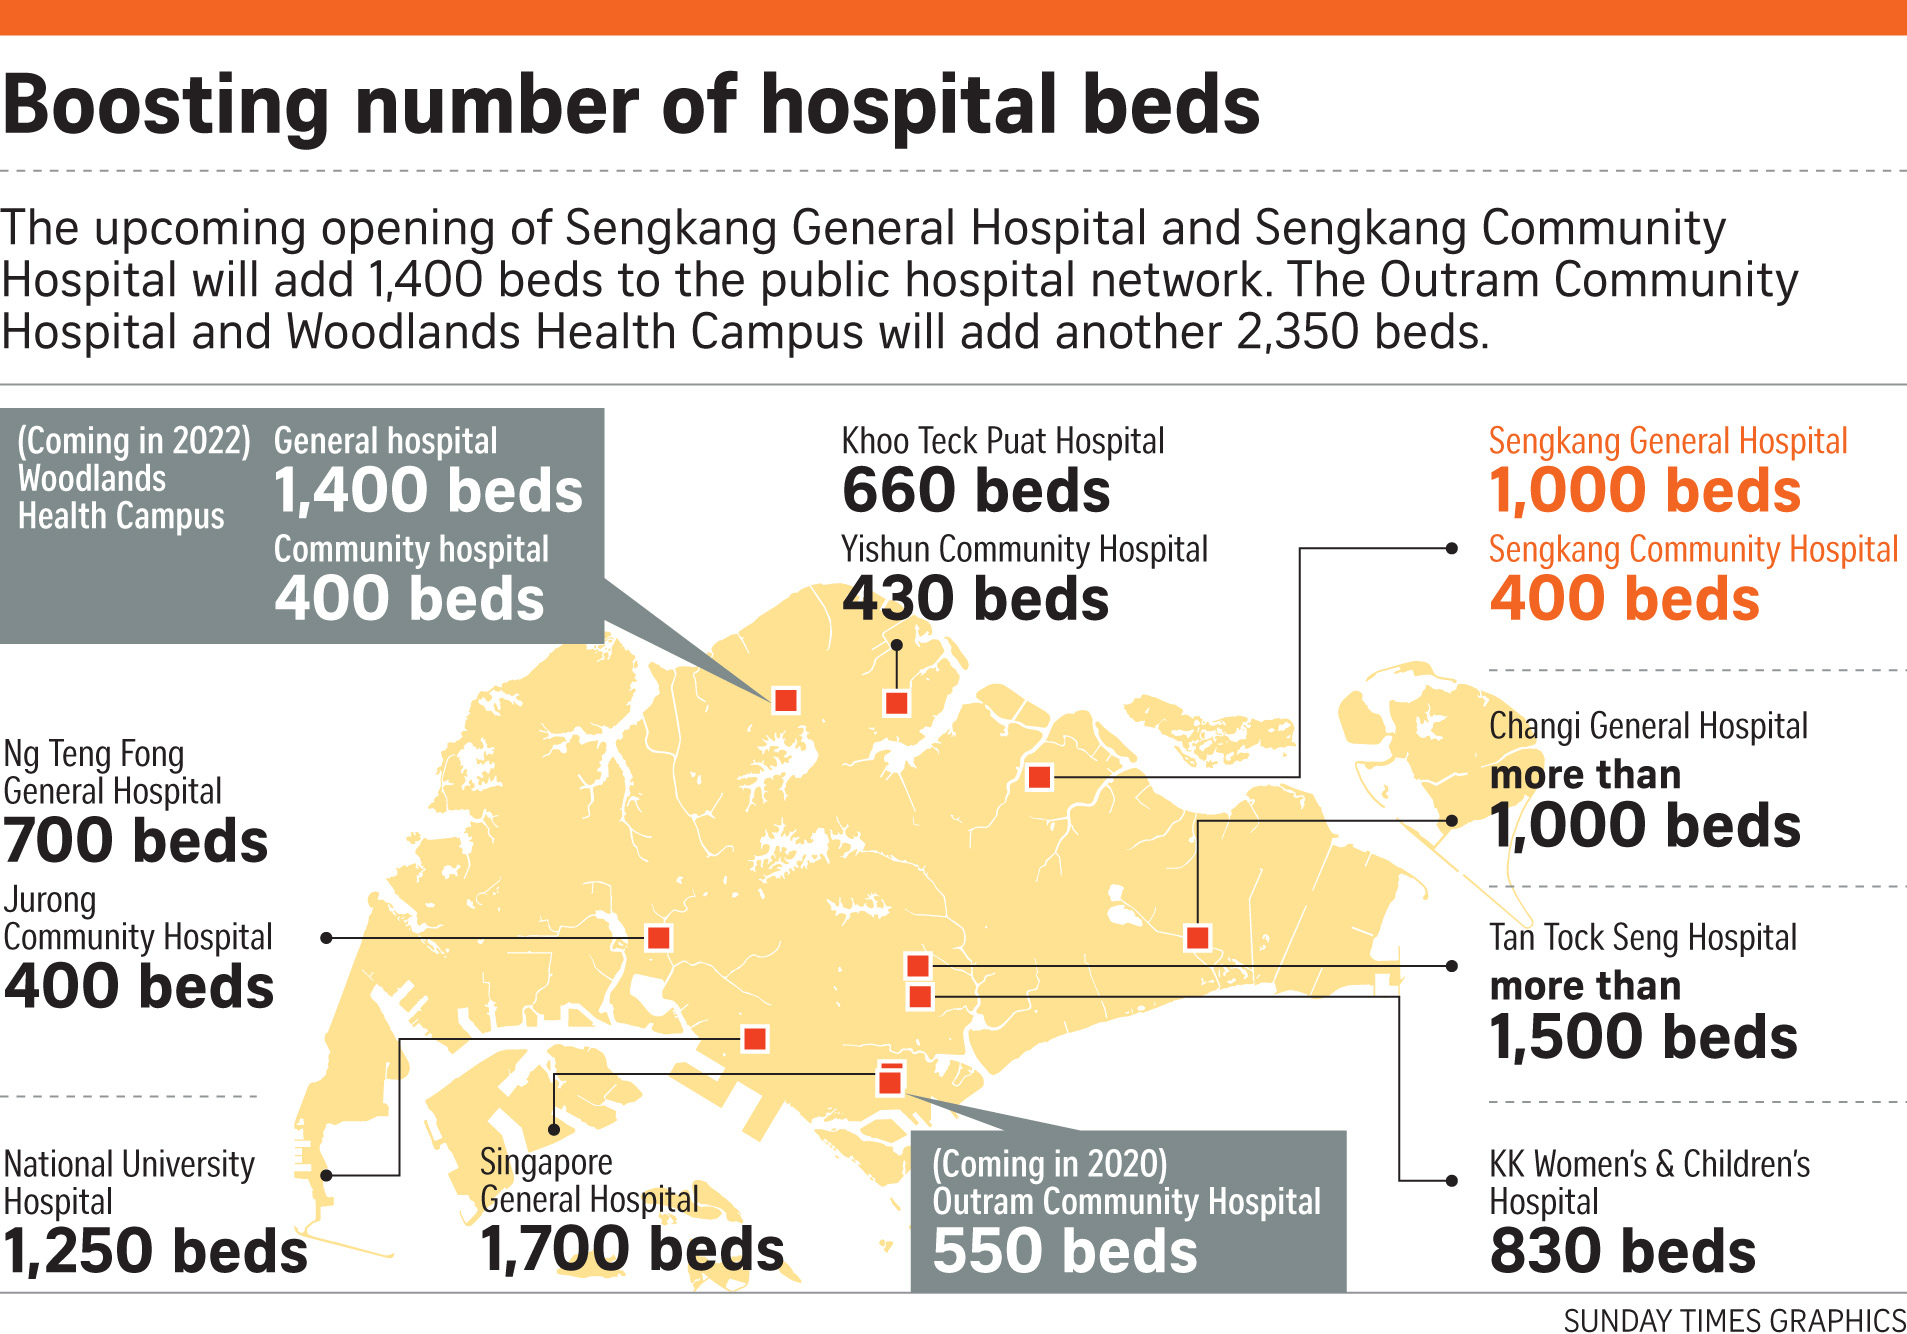 Sengkang hospitals will provide north-east residents with quality healthcare closer to home 